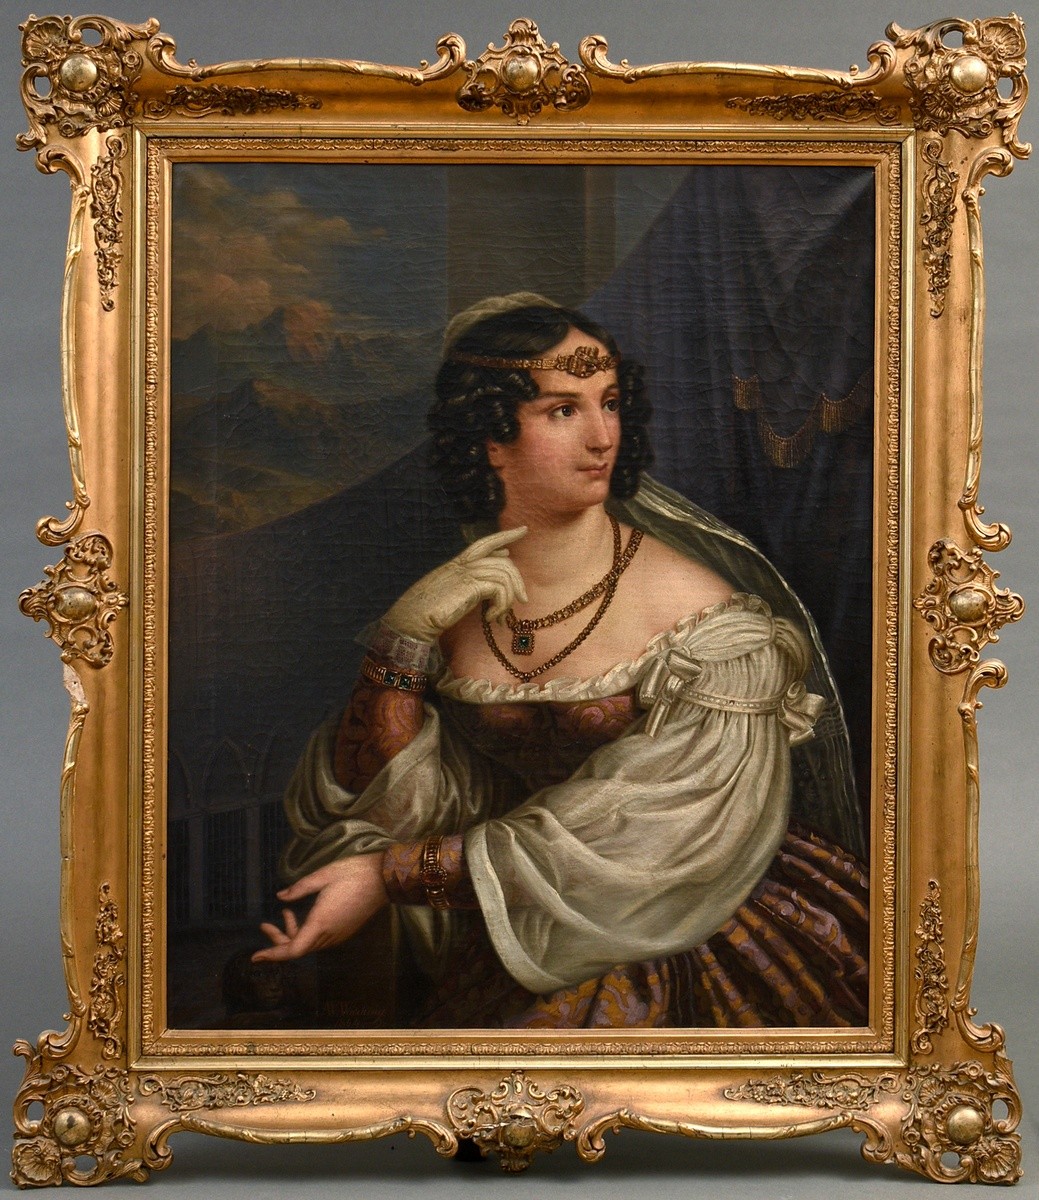 Wedeking, August Wilhelm (1807-1876) "The Lady with the Glove" 1844, oil/canvas, sign./dat. lower l - Image 2 of 12